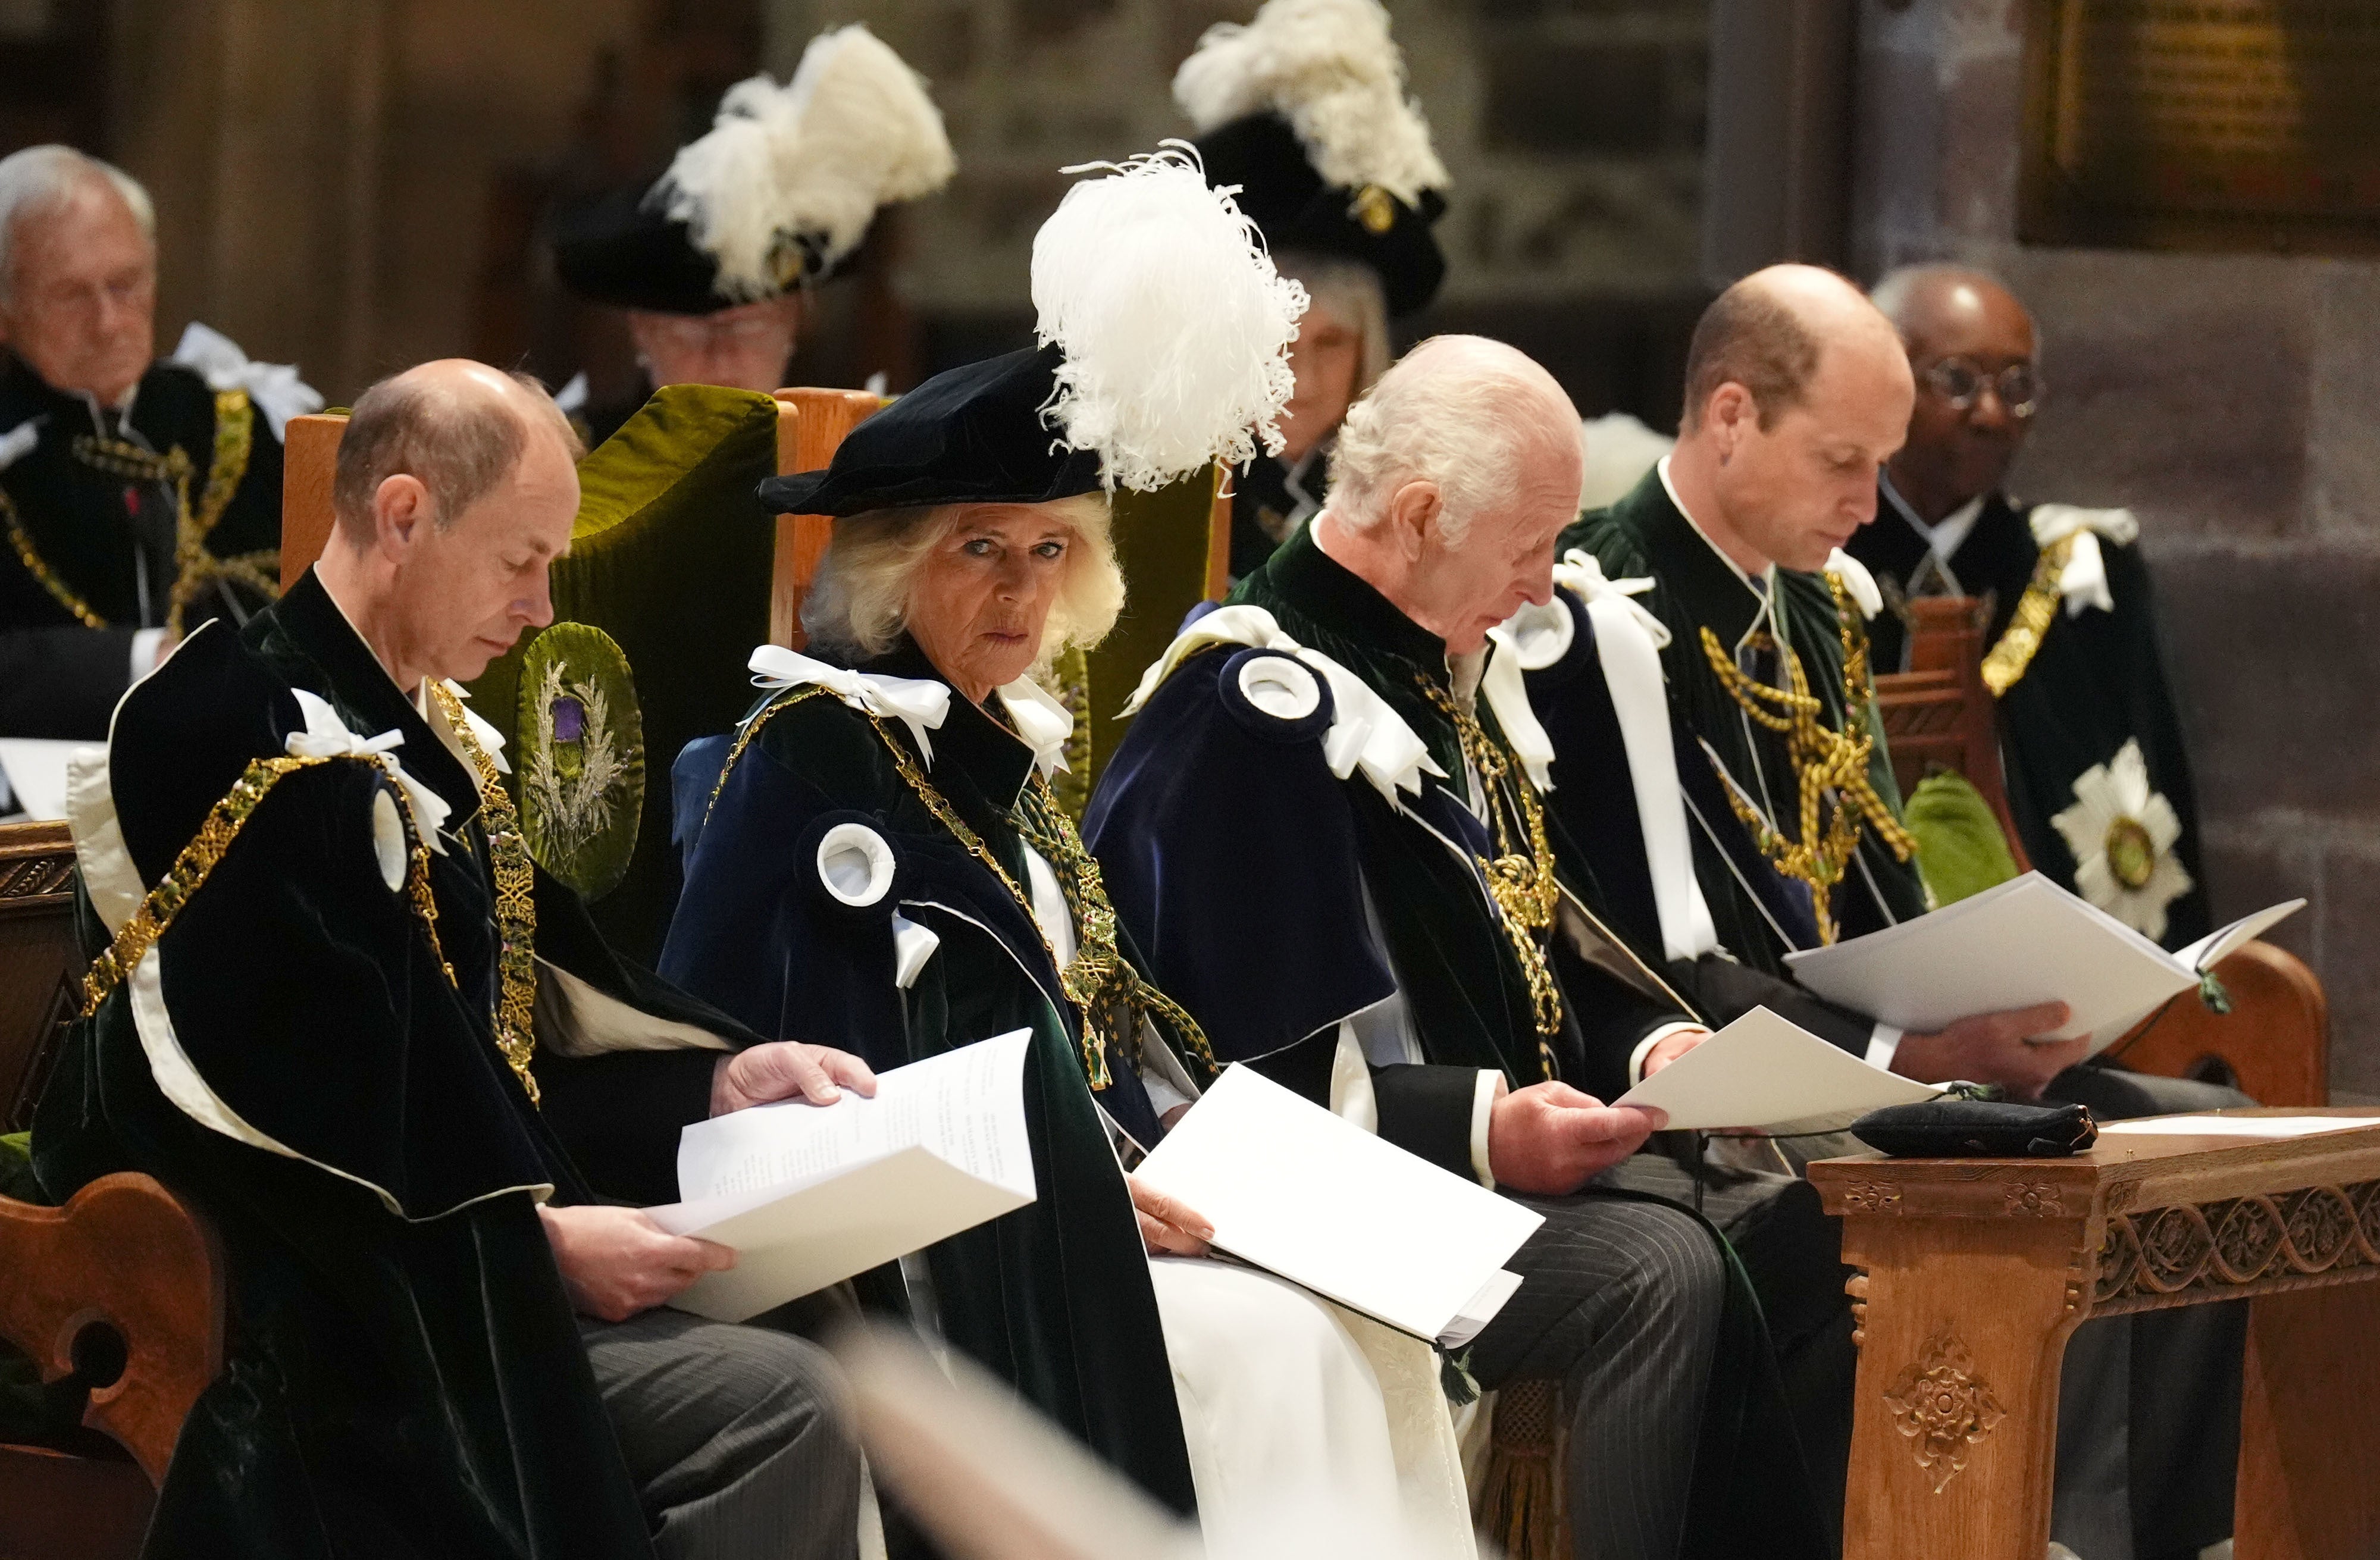 (l to r, front row) The Duke of Edinburgh, the Queen, the King and the Prince of Wales, known as the Duke of Rothesay when in Scotland, attend the Order of the Thistle Service at St Giles’ Cathedral in Edinburgh (Andrew Milligan/PA)